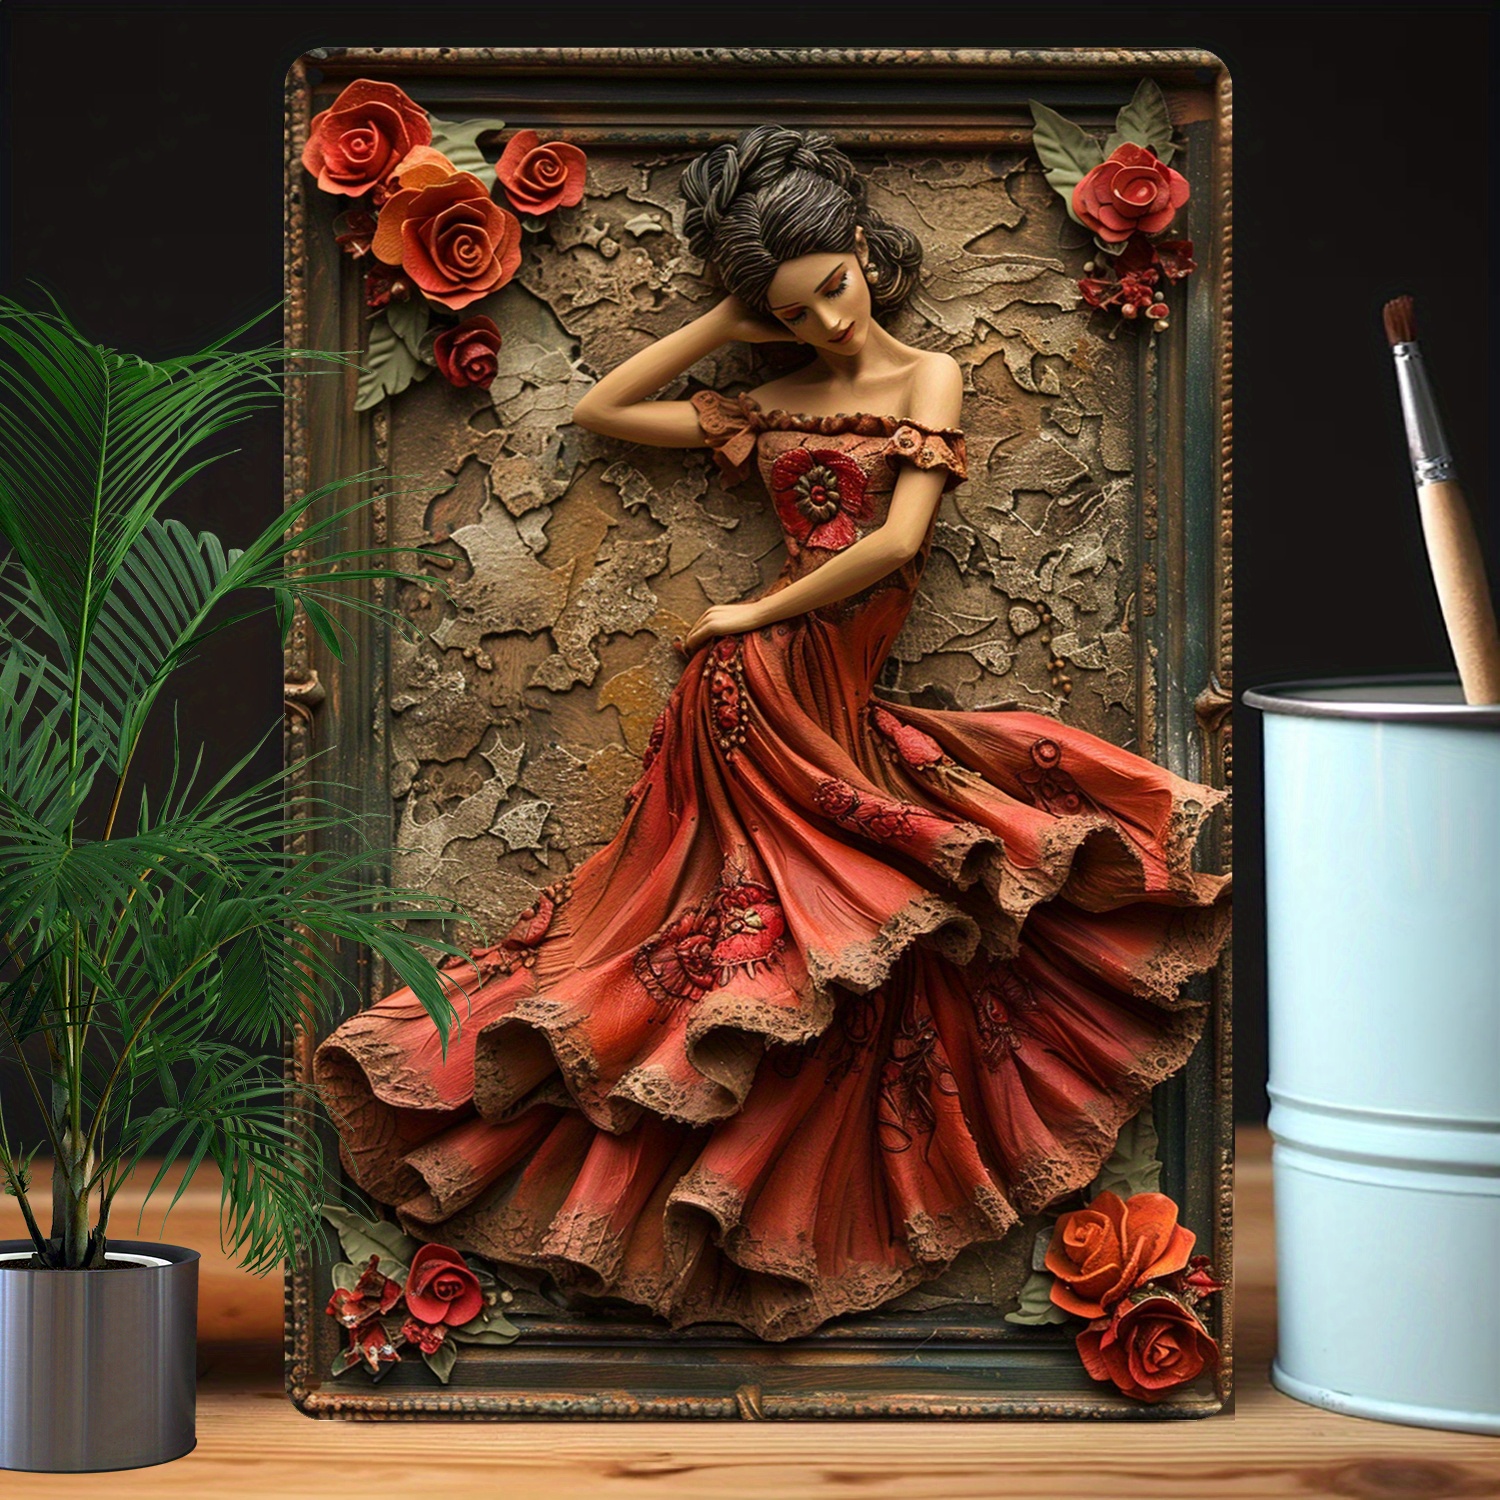 

1pc Aluminum Metal Wall Art With 2d Visual Effects, Spring Summer Flamenco Dancer Design, High Bend Resistance, Moisture Resistant Decorative Tin Sign For Home, Office, And Studio - A1340